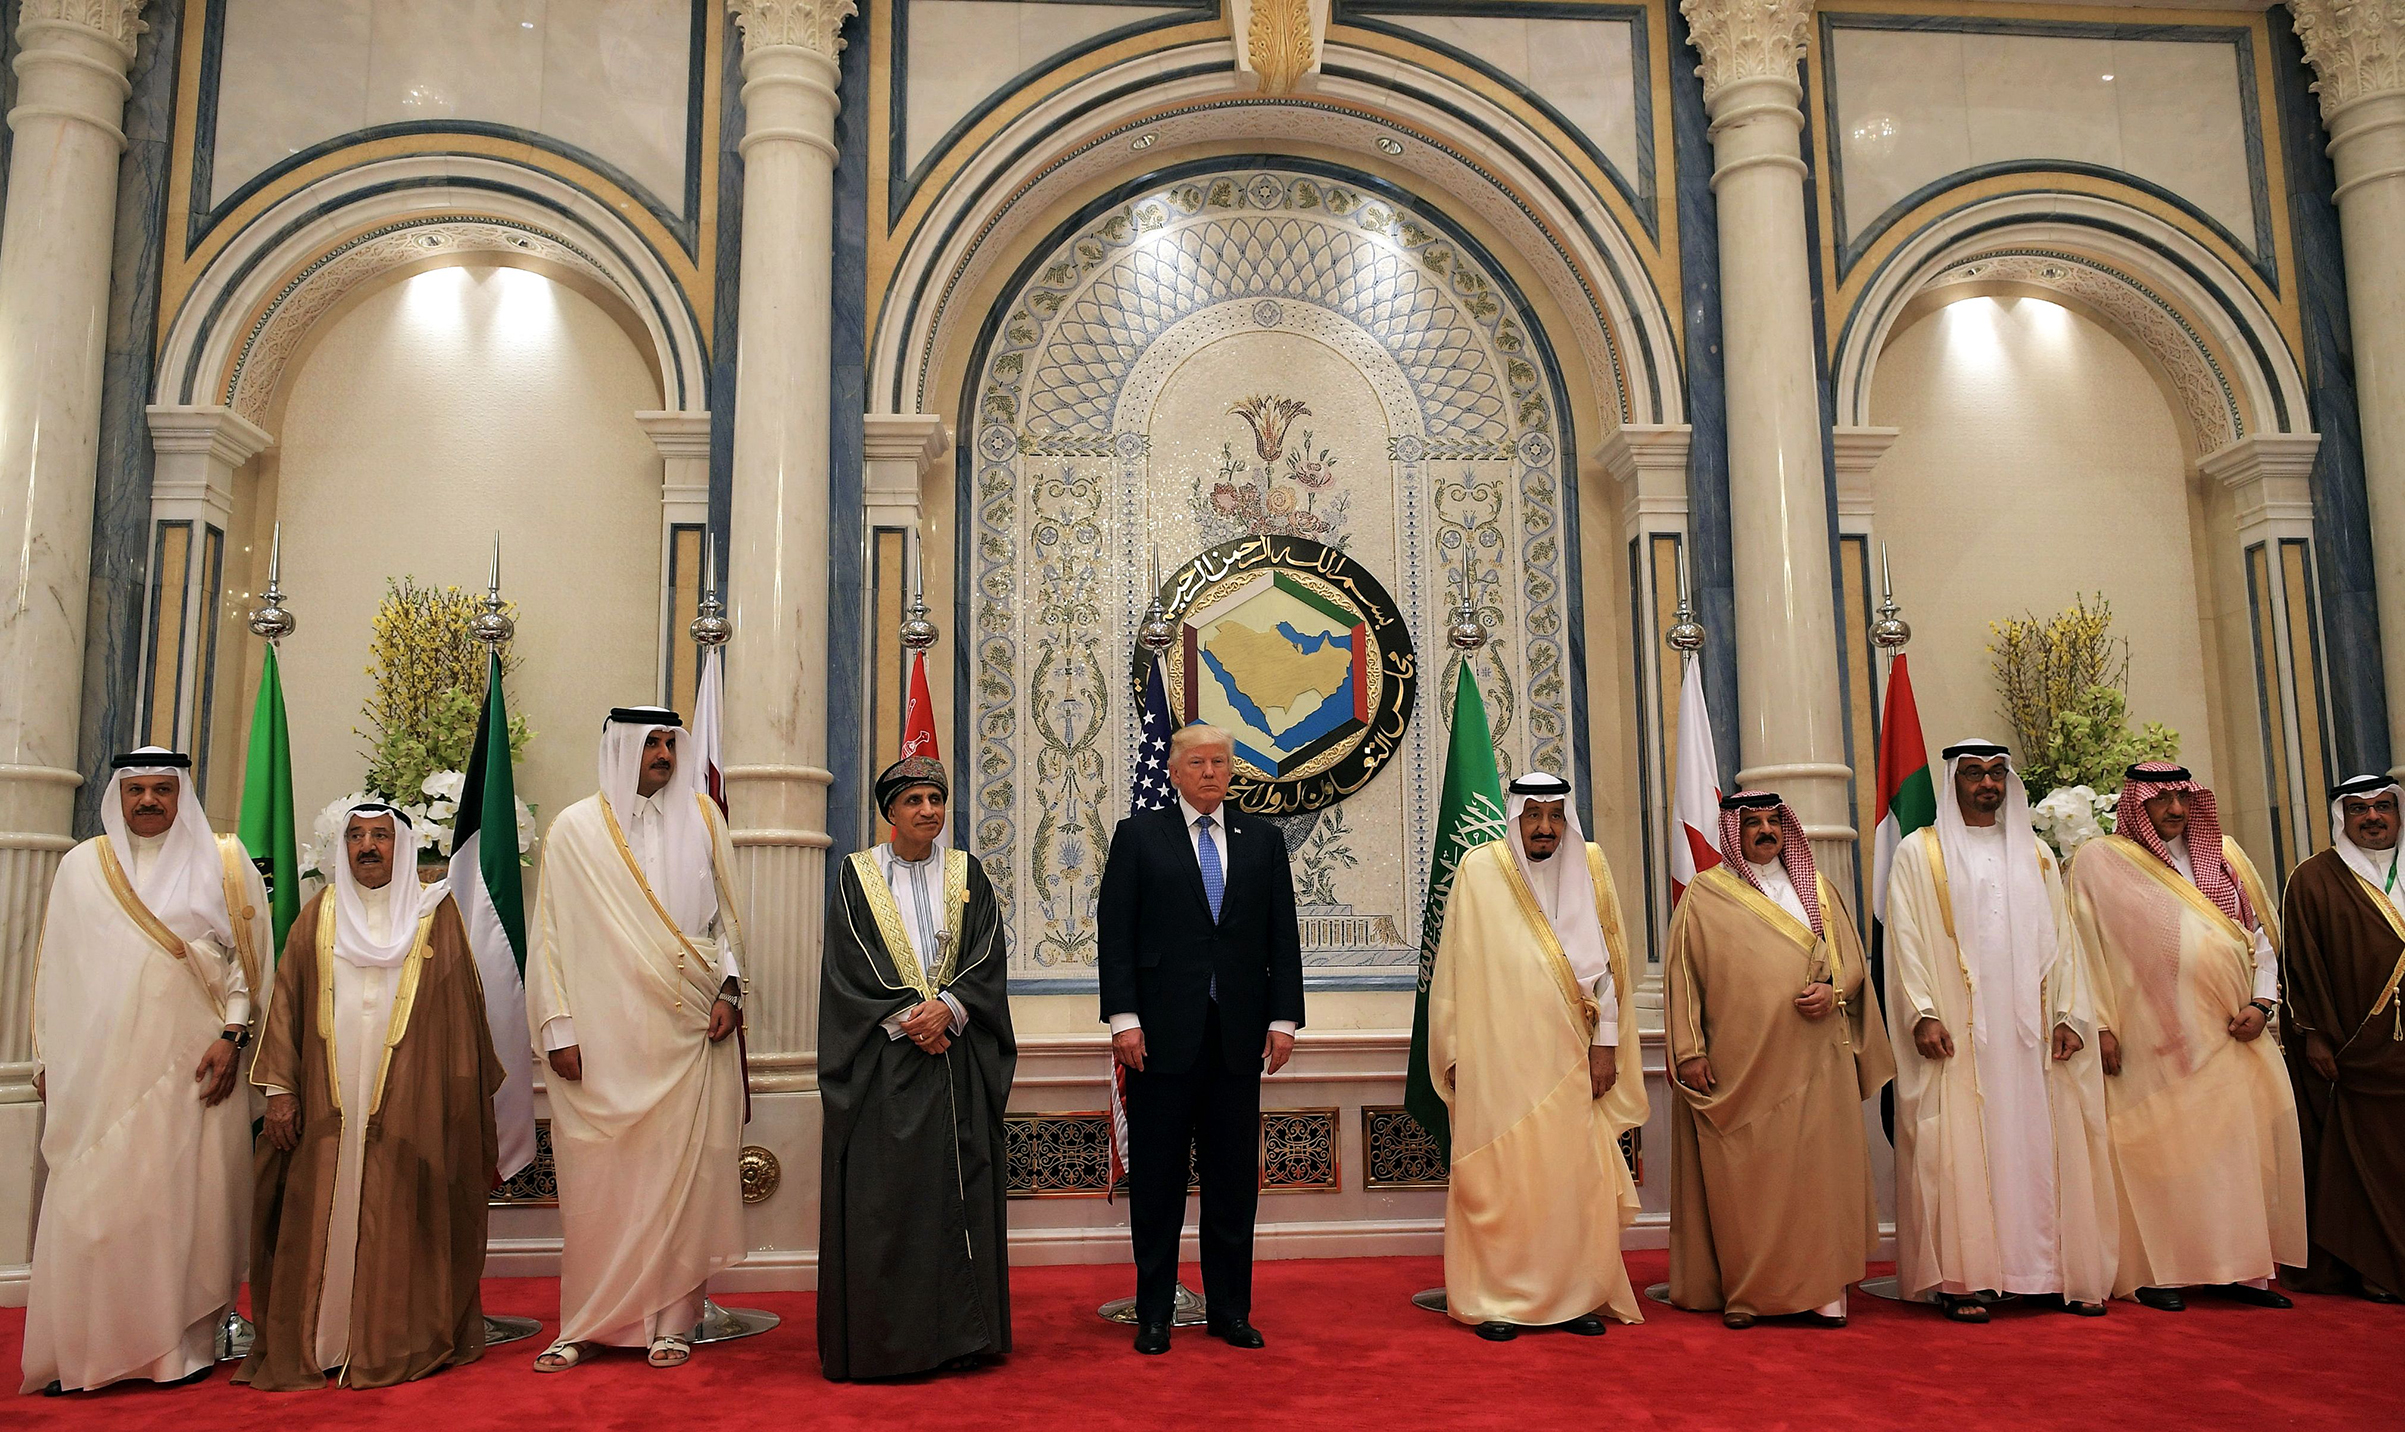 President Donald Trump and Saudi's King Salman bin Abdulaziz al-Saud pose for a picture with leaders of the Gulf Cooperation Council in Riyadh on May 21, 2017. (Mandel Ngan—AFP/Getty Images)